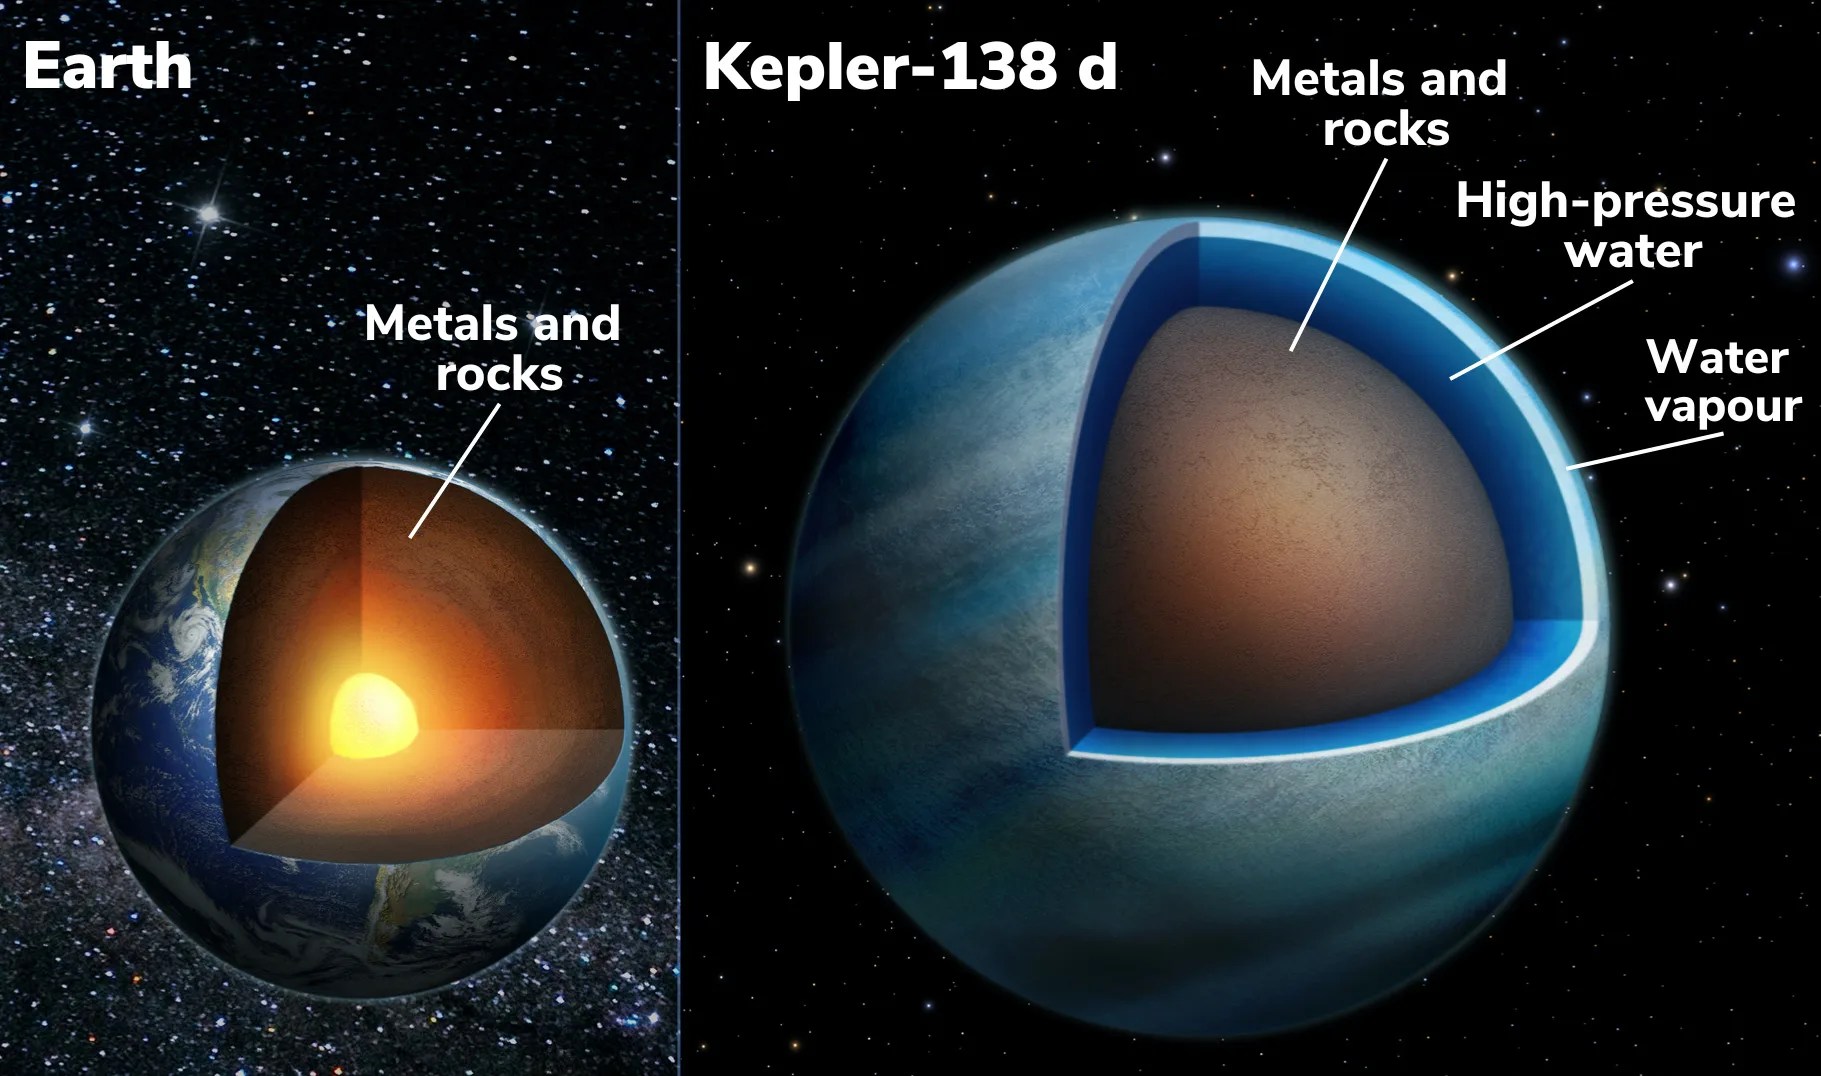 Left: a cross section of Earth showing its interior. Right: a cross section of the blue world, Kepler-138 d with a brown core (rocks &amp; metal) below a dark blue high-pressure water layer that is below a light blue water vapor envelope..